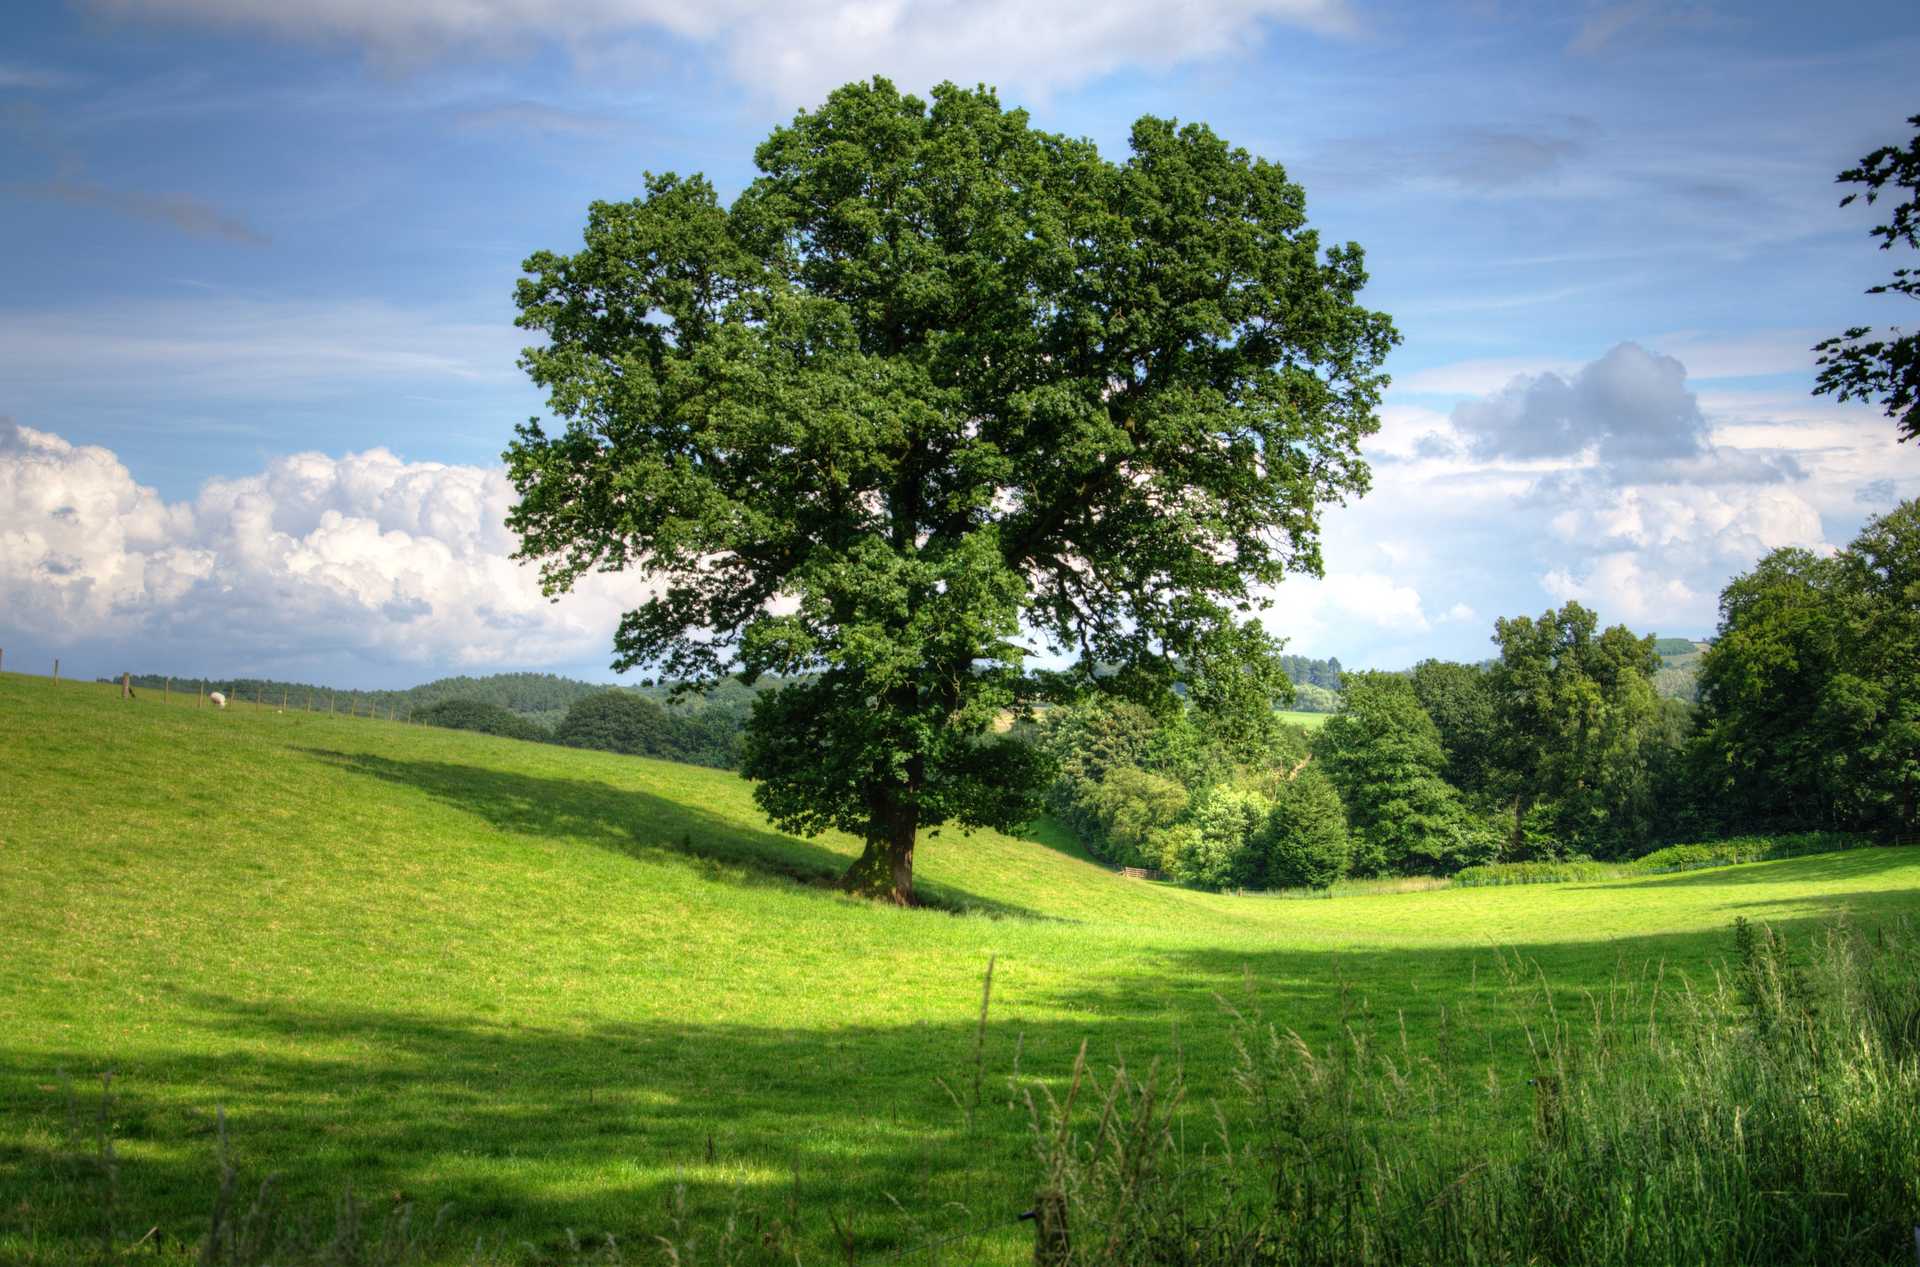 Green Tree on a Grass Field During Daytime